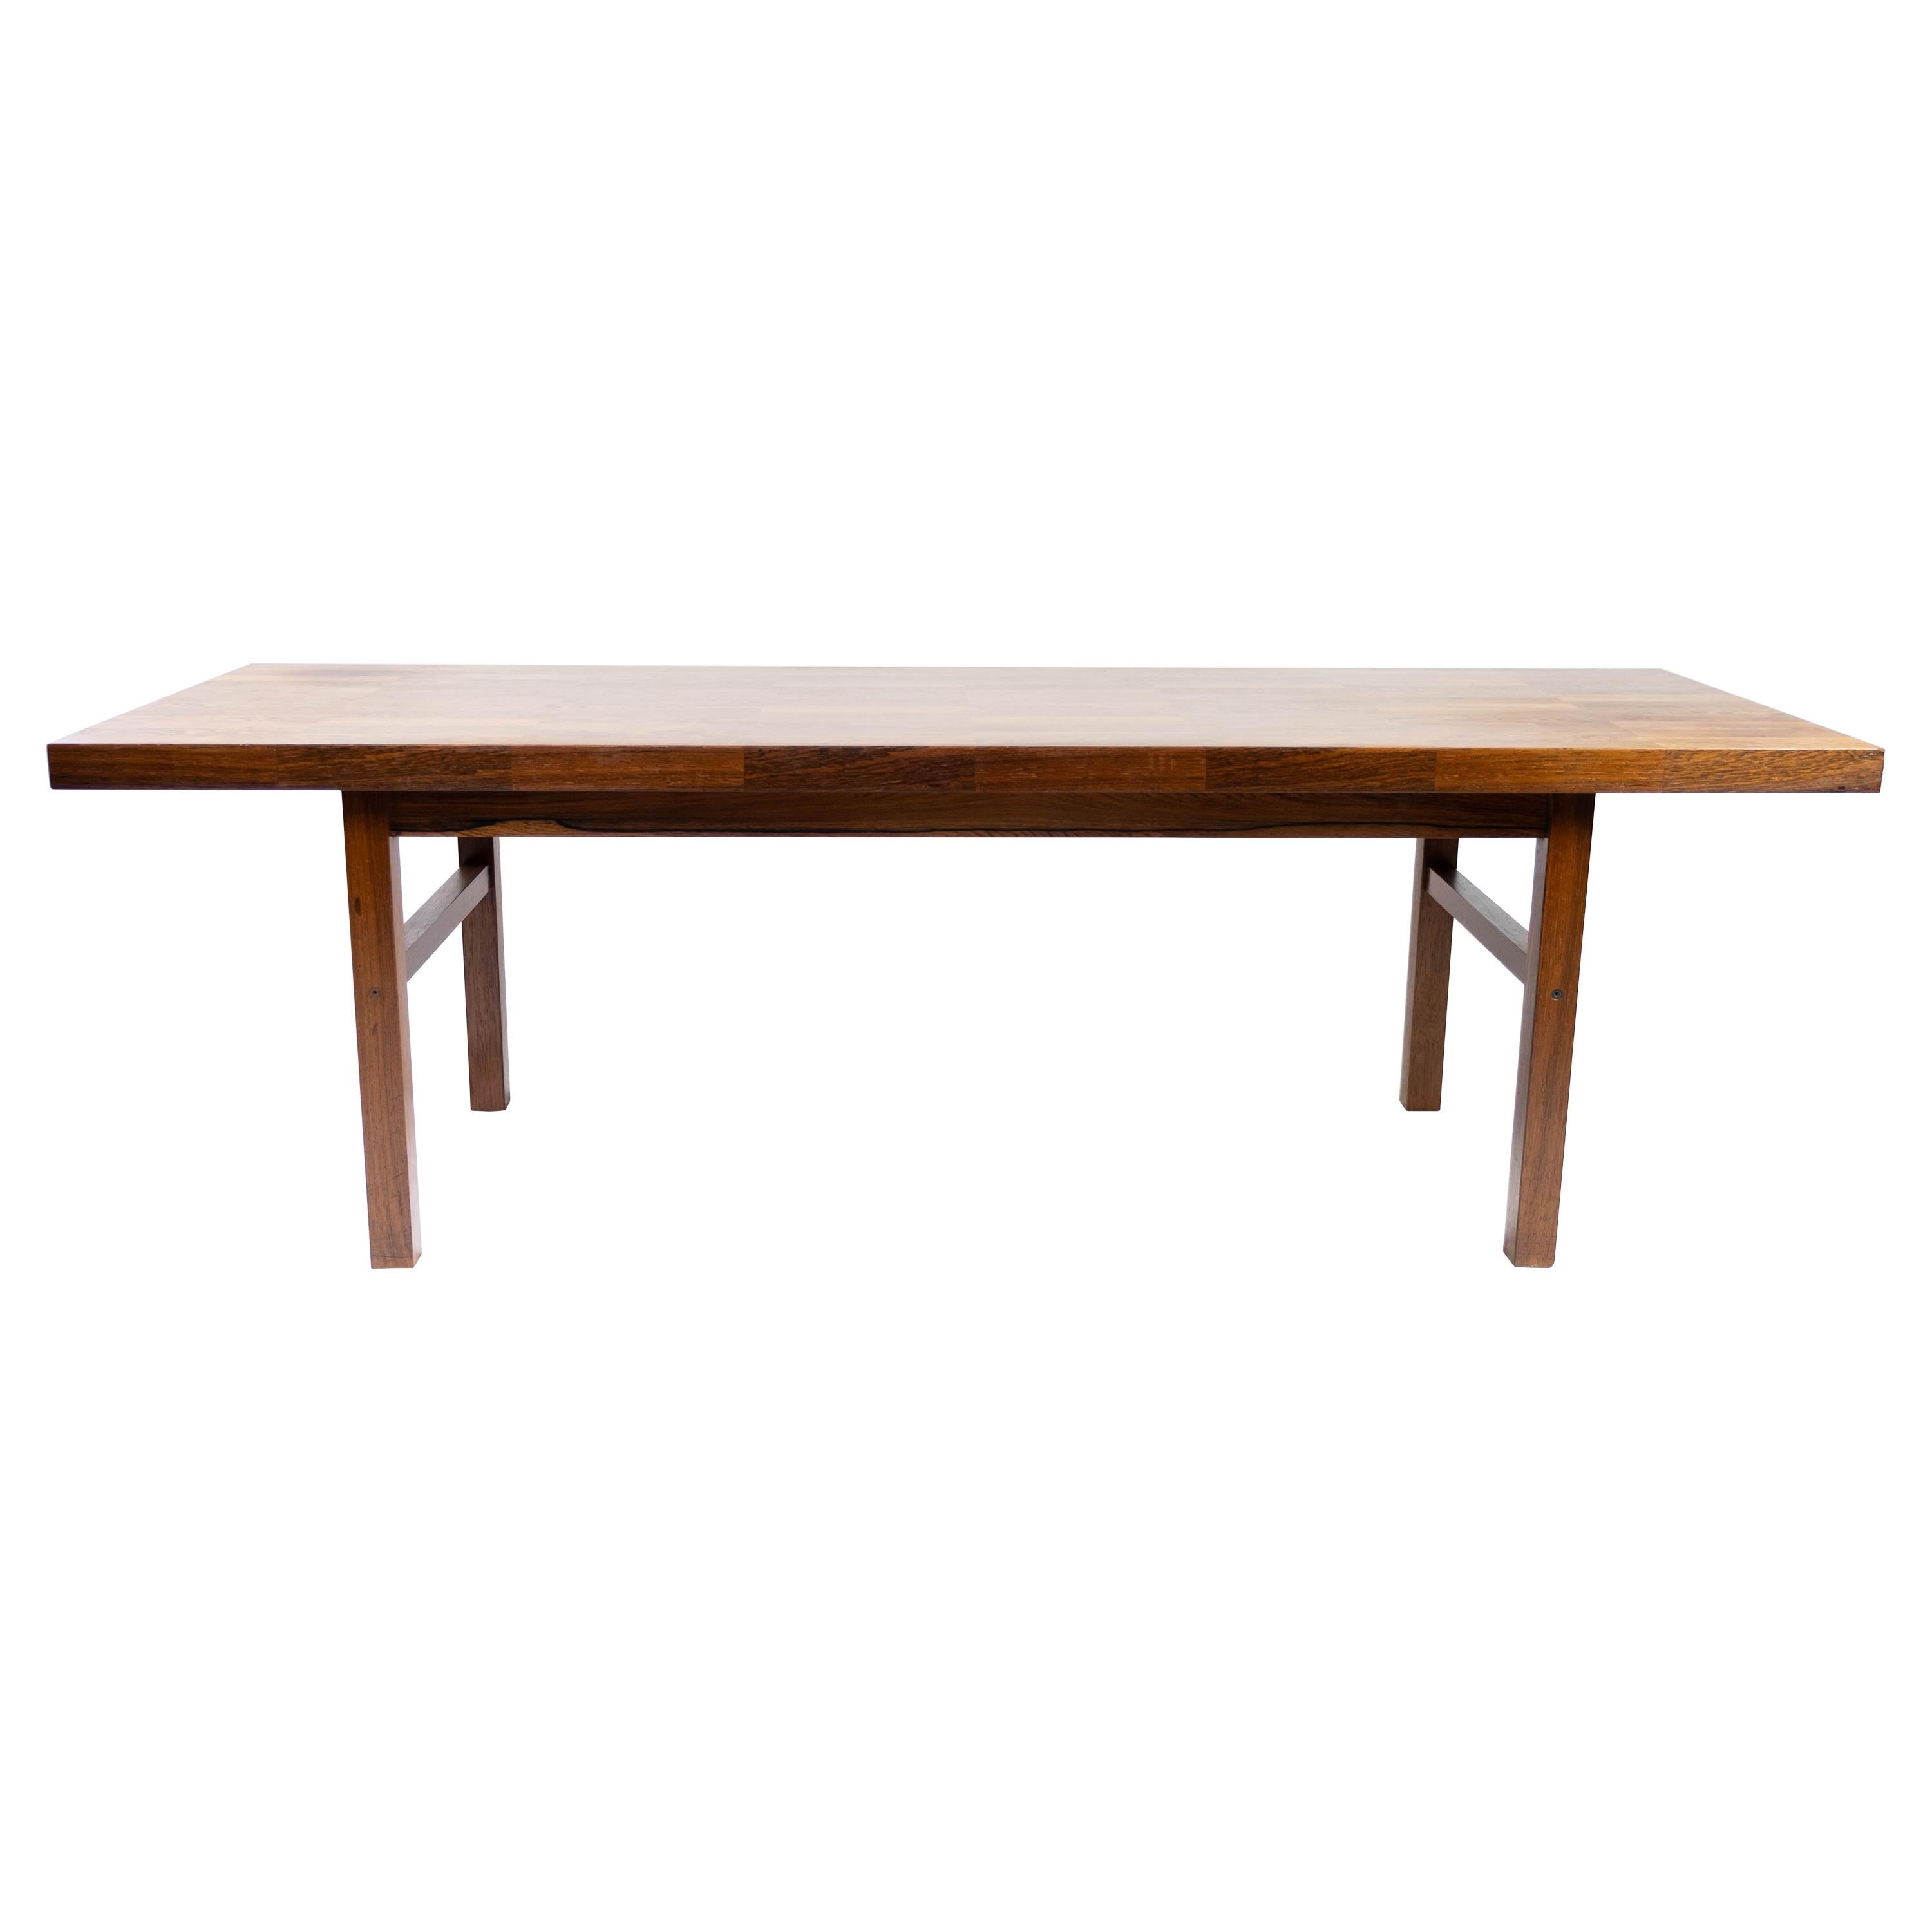 Coffee Table Made In Rosewood, Danish Design From 1960s For Sale